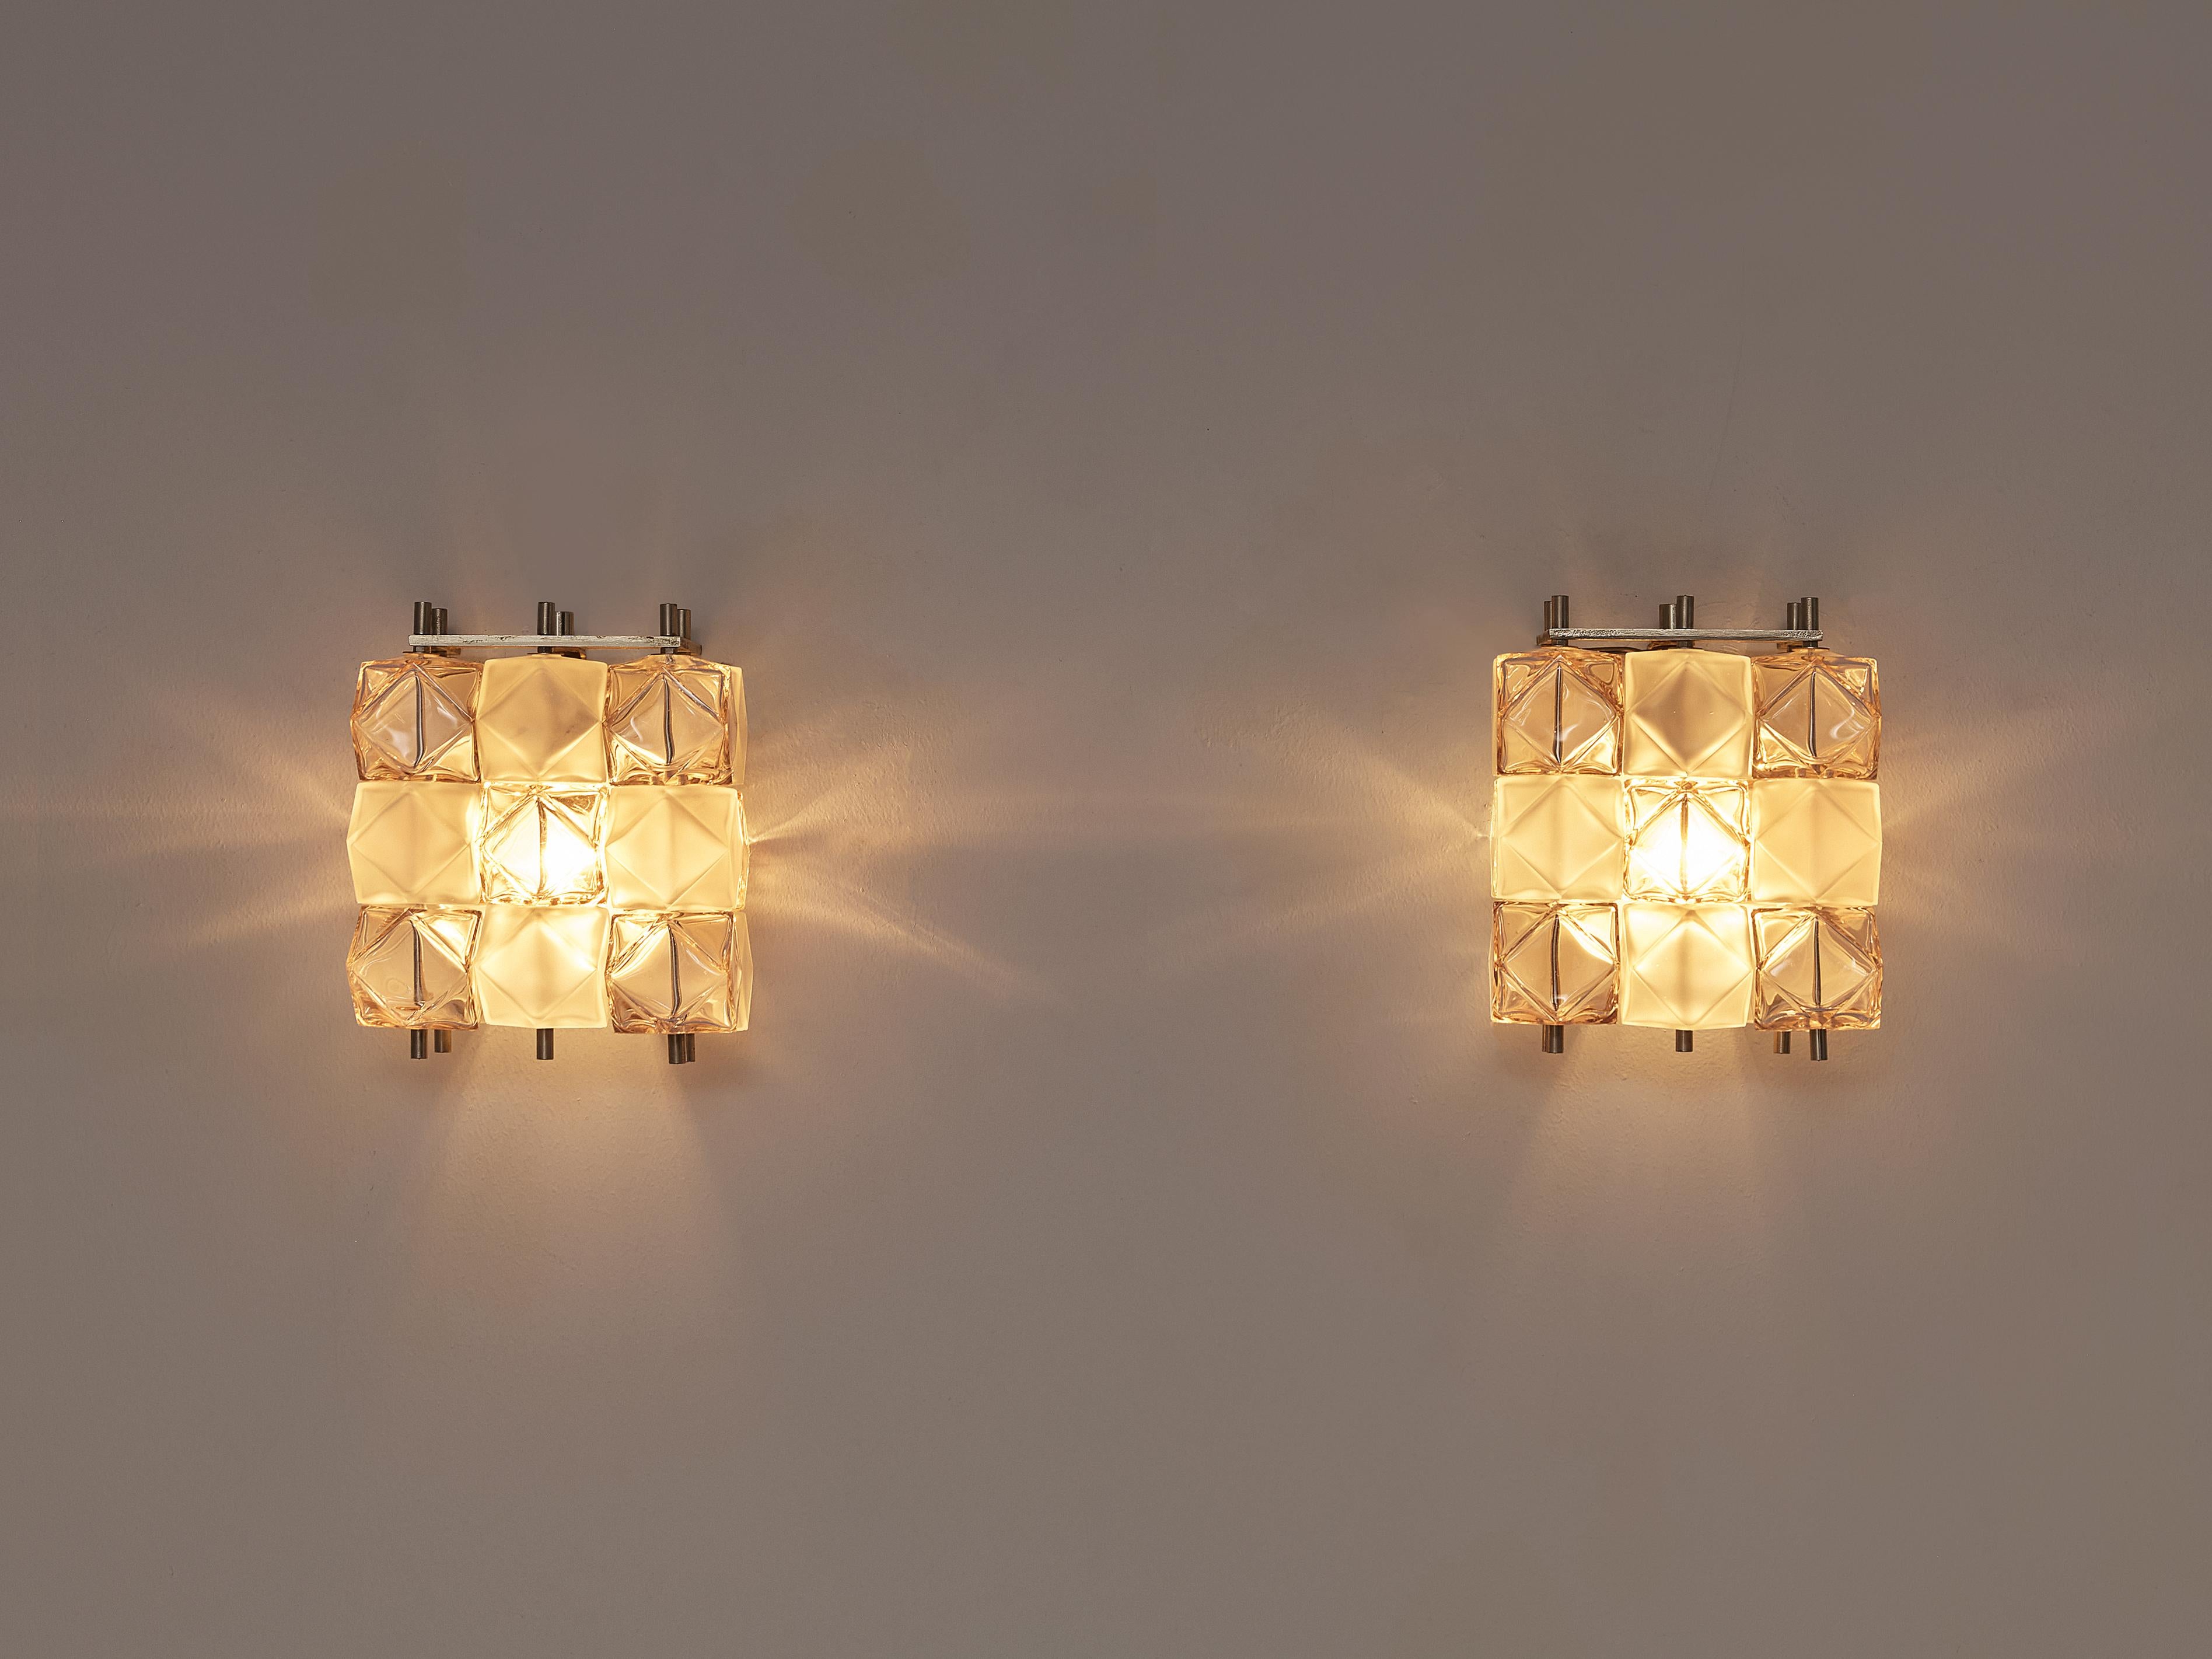 European Postmodern Pair of Wall Lights in Bicolored Glass Cubes